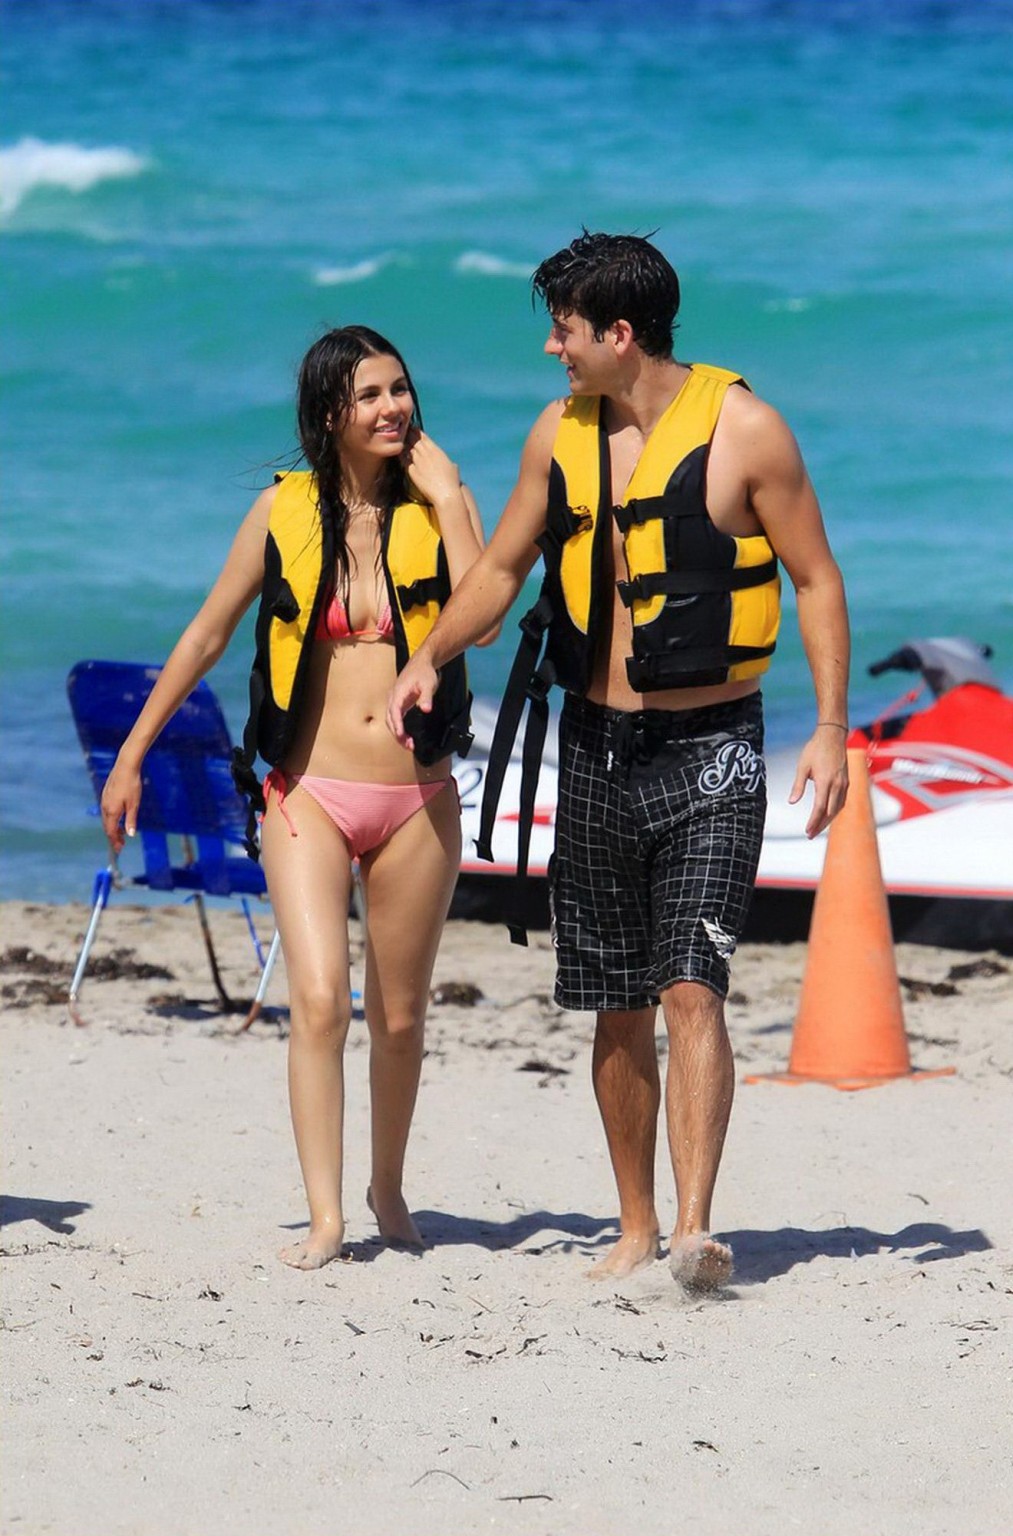 Victoria Justice shows cameltoe wearing wet bikini on a beach in Florida #75289721